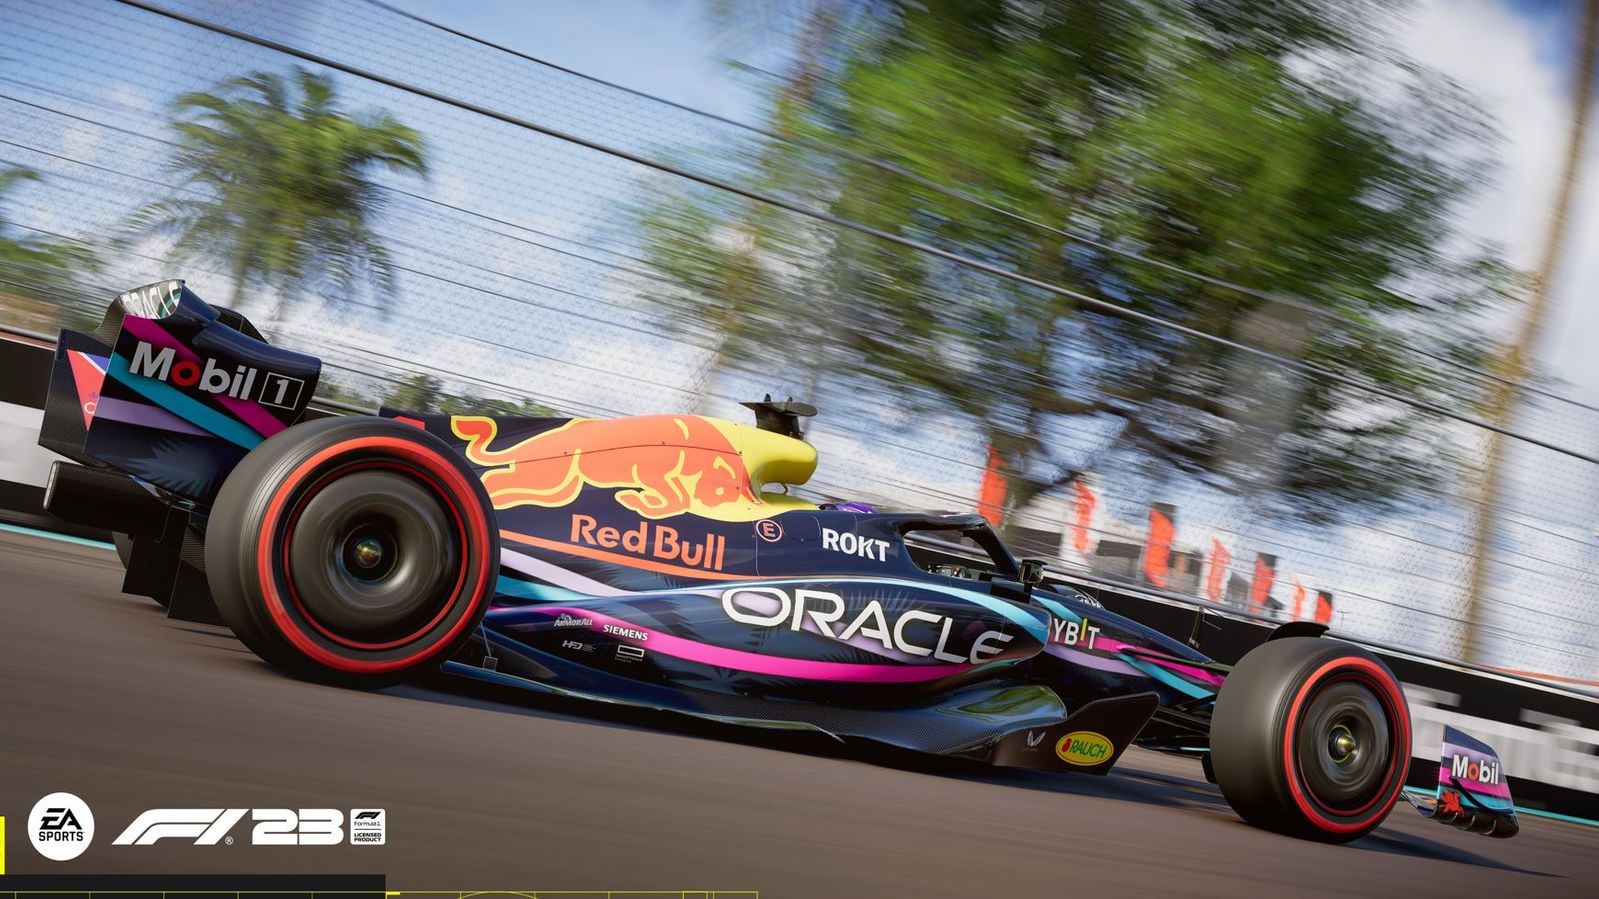 The Miami livery for Red Bull in F1 23